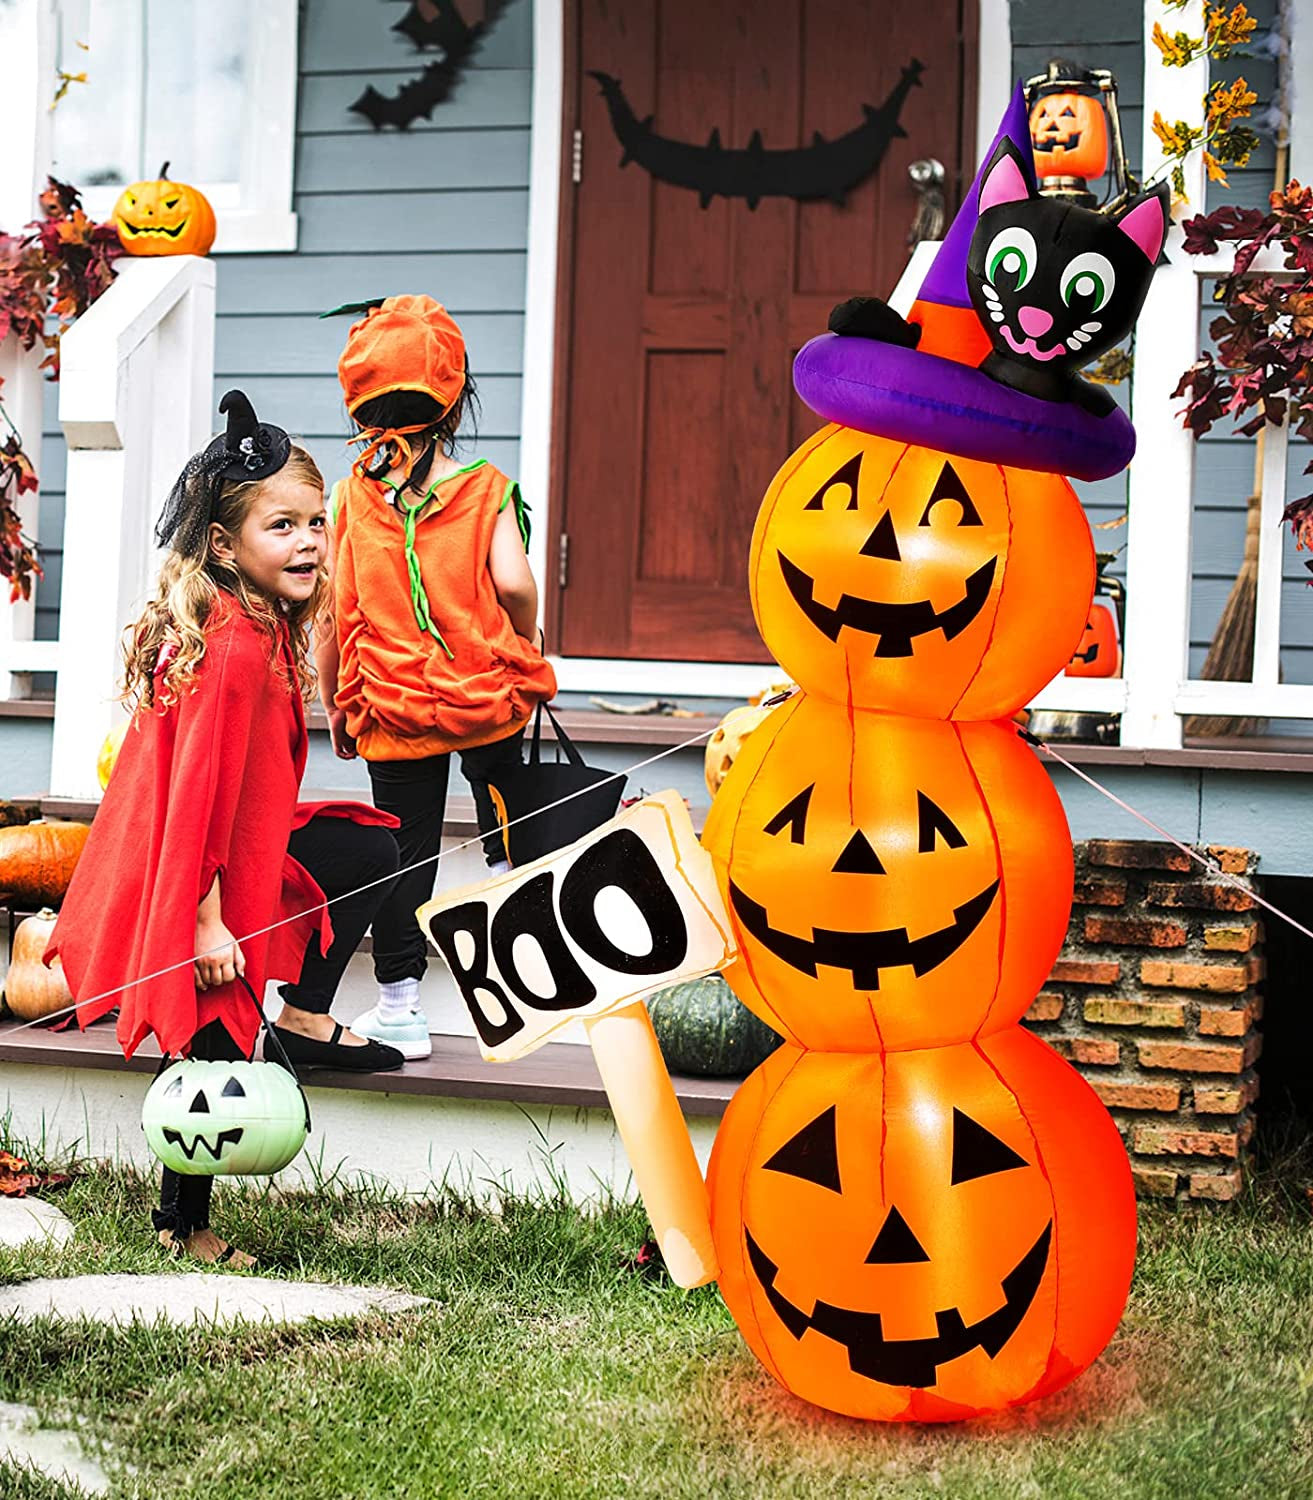 Halloween Inflatable Decoration, 5Ft/1.5M Cute Pumpkins Lamp with Witch Hat Cat Build-In LED Light up Home Yard Garden Lawn for Indoor Outdoor Holiday Party